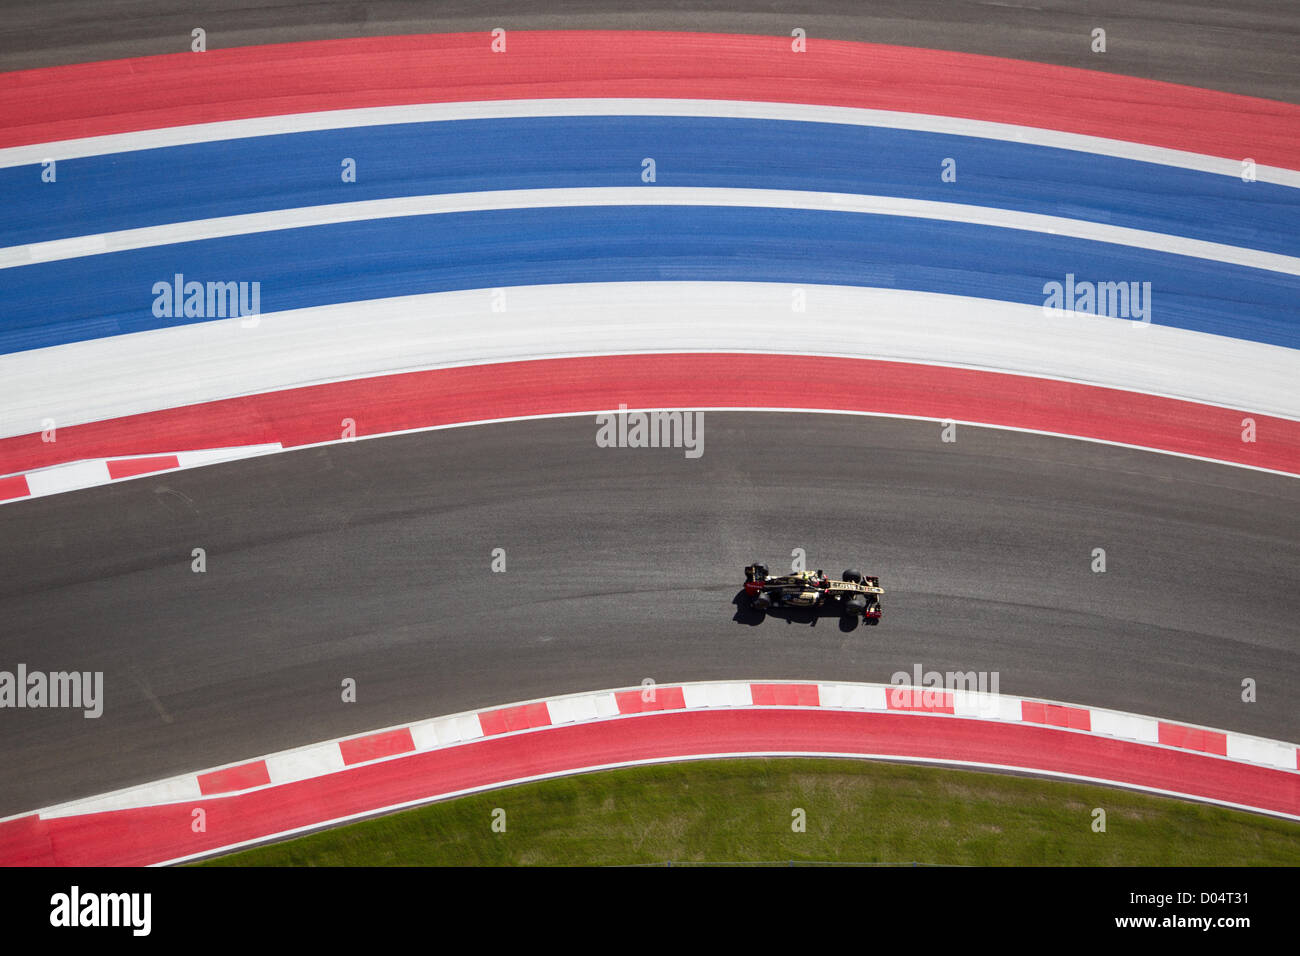 Driver Kimi Raikkonen of Lotus during practice for the F1 United States Grand Prix at Circuit of the Americas near Austin Stock Photo